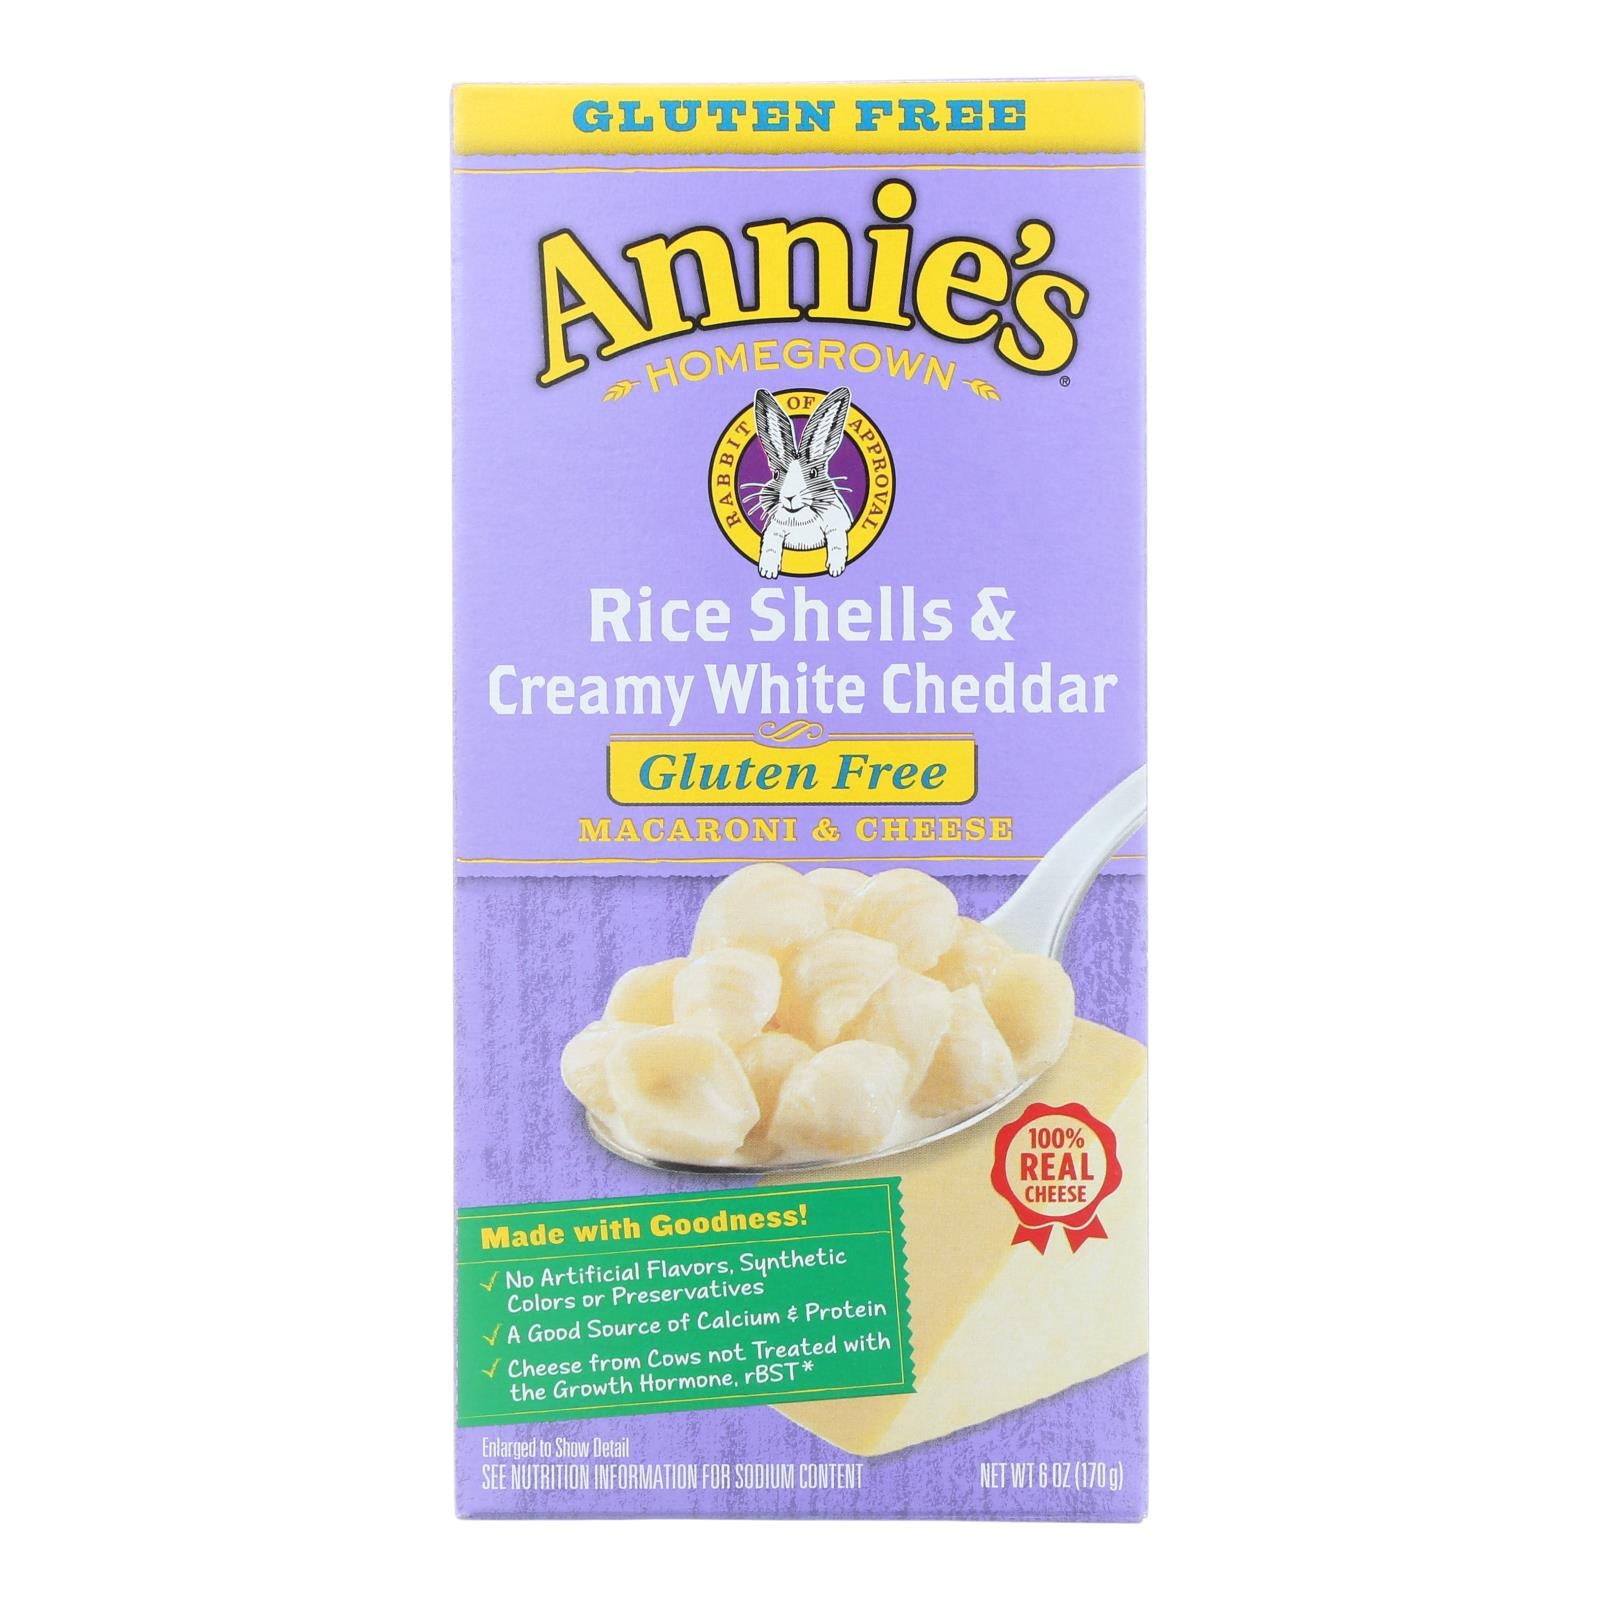 Annie'S Homegrown, Annies Homegrown Macaroni and Cheese - Rice Shells and Creamy White Cheddar - Gluten Free - 6 oz - case of 12 (Pack of 12)